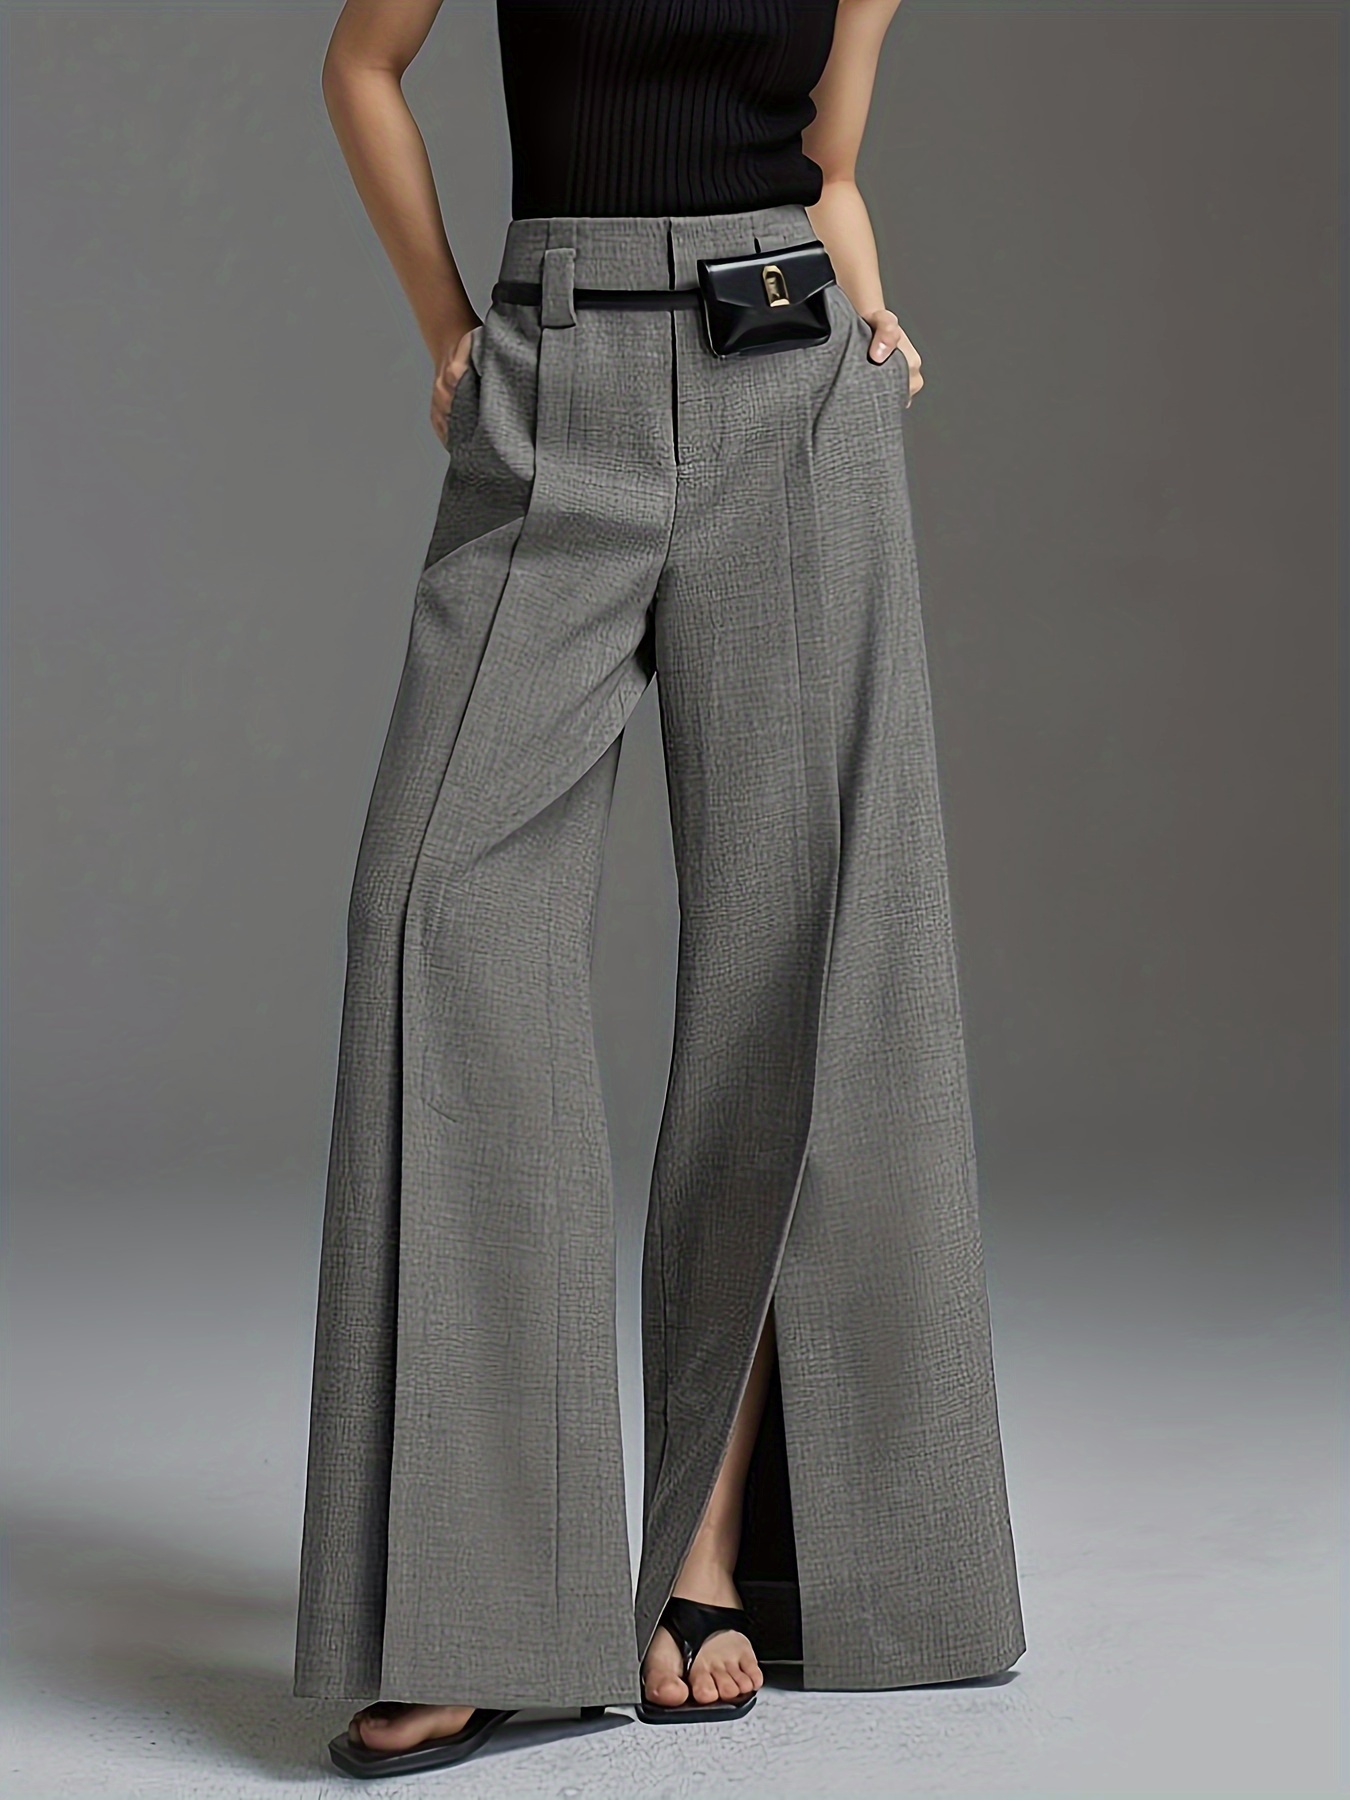 Split Wide Leg Suits Pants for Women High Waisted Fashion Solid